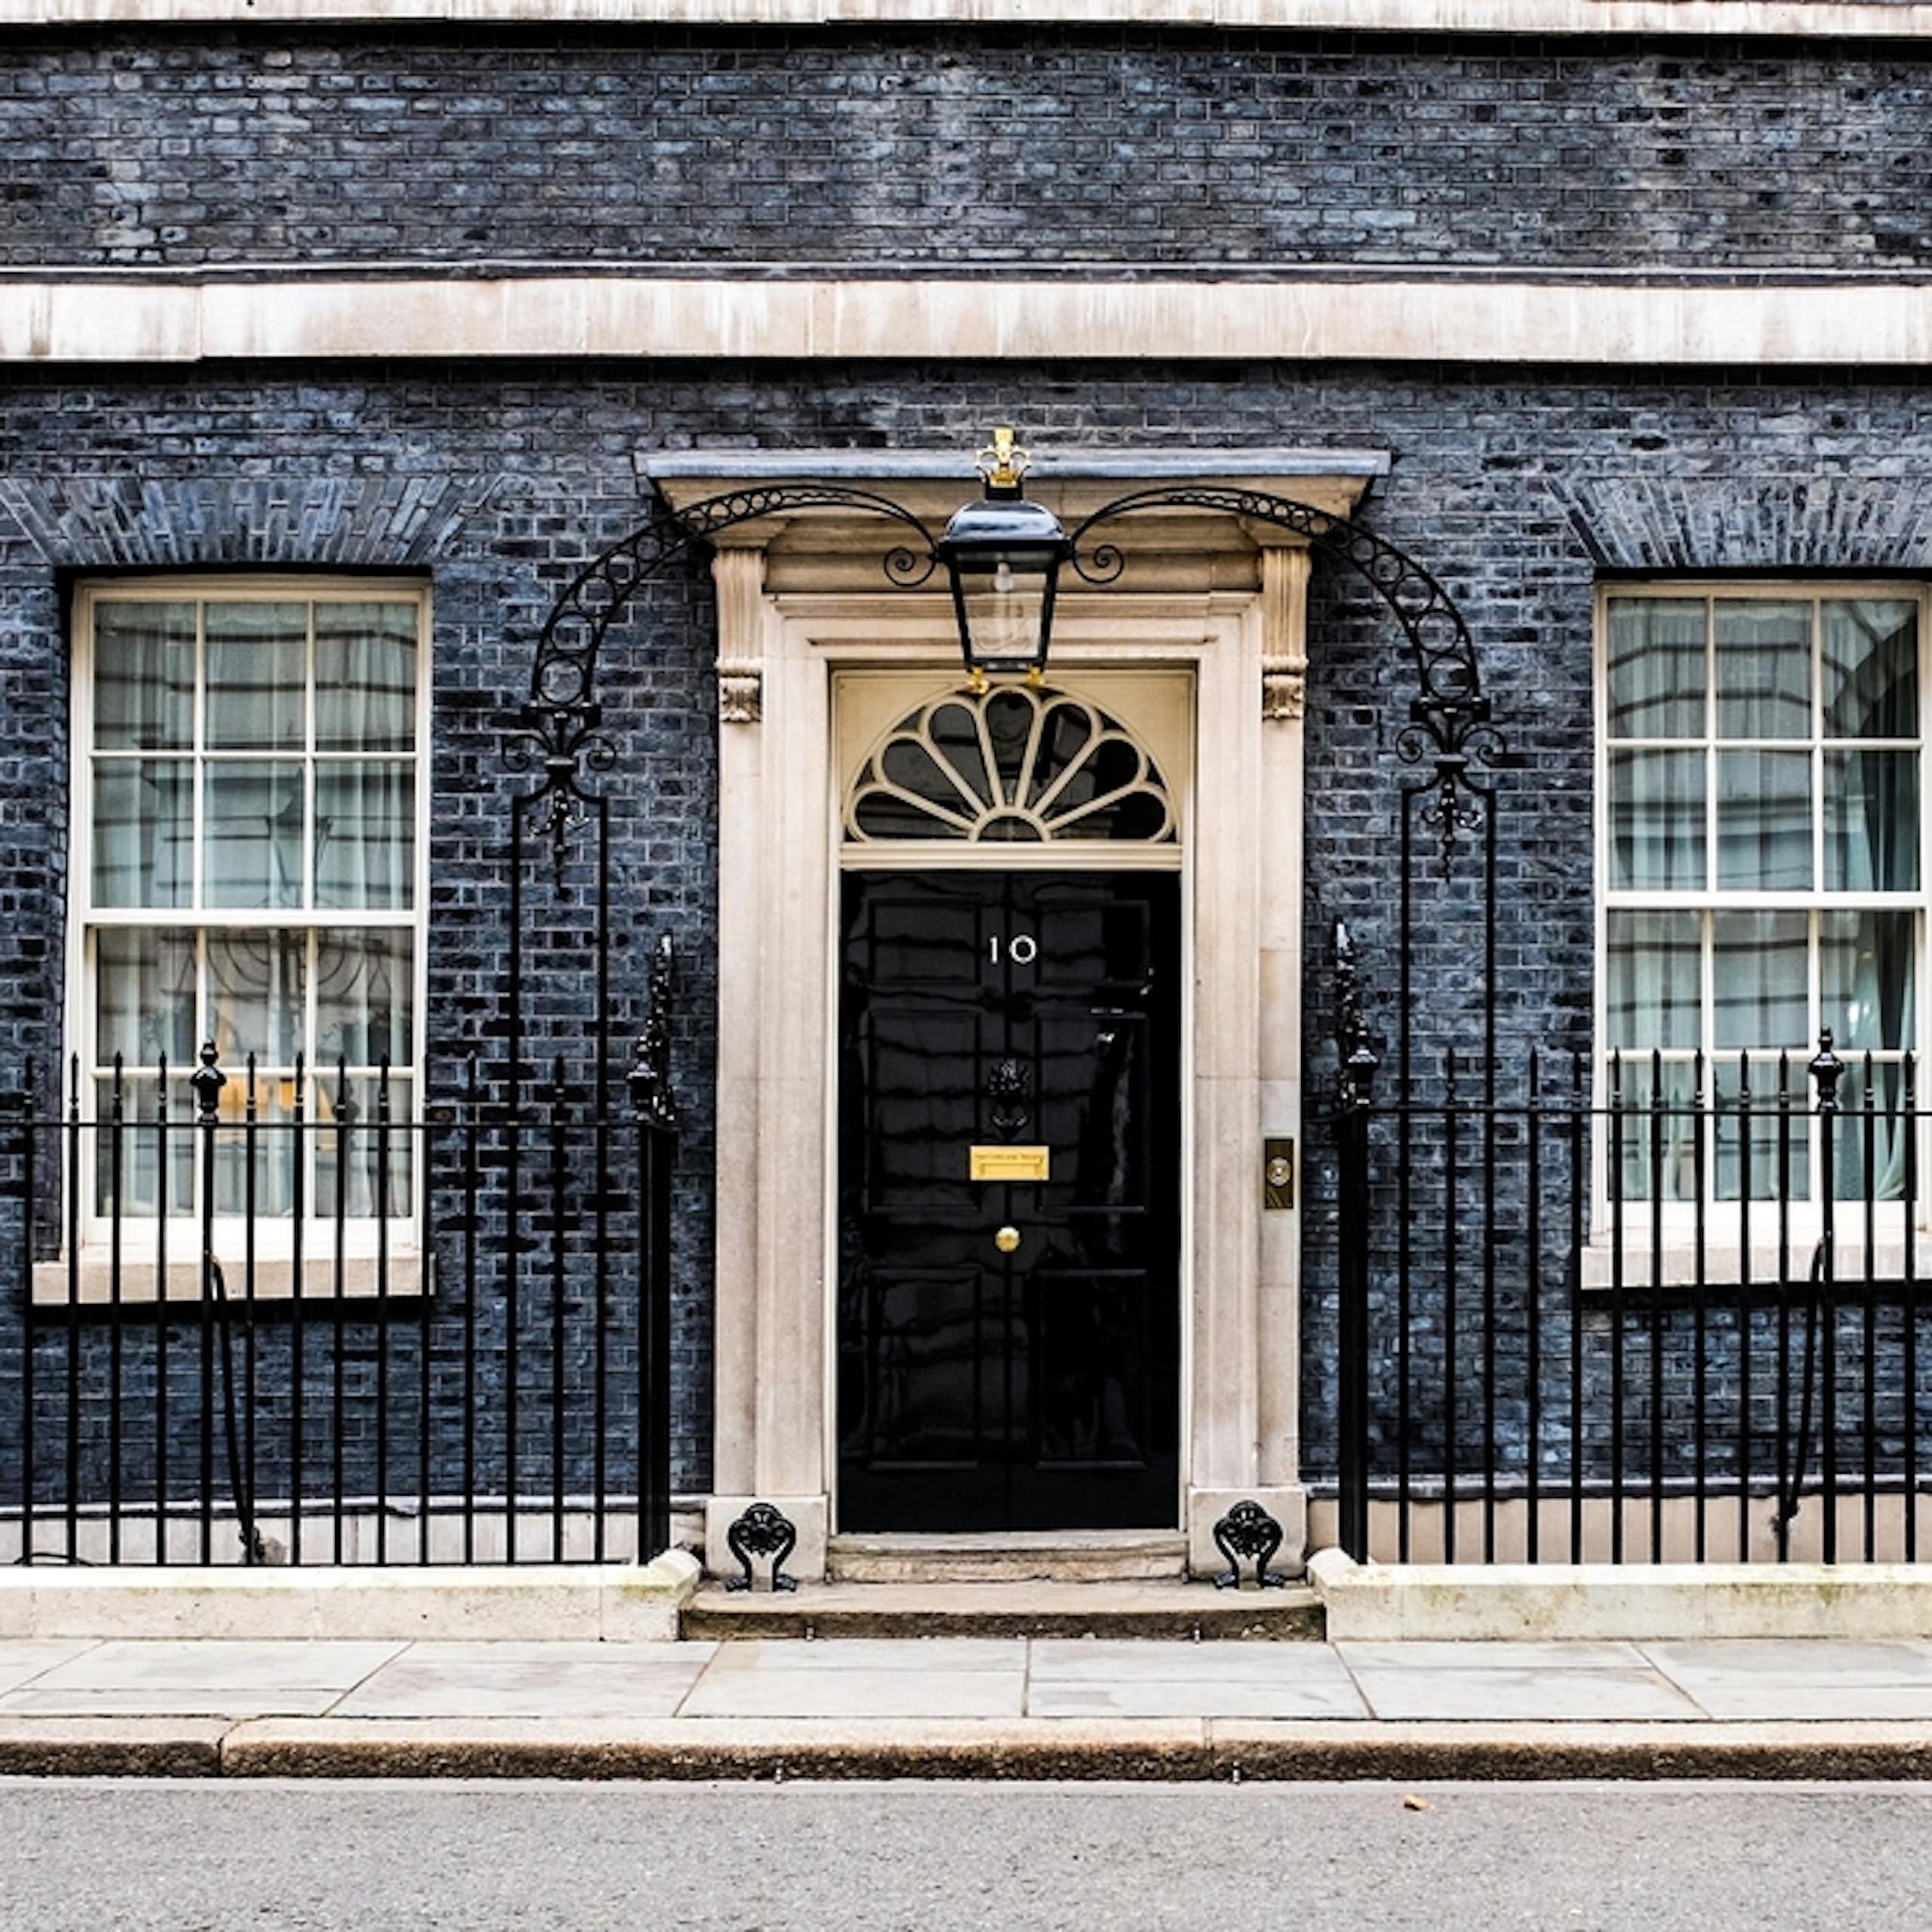 UK election called for 4 July – what happens next?